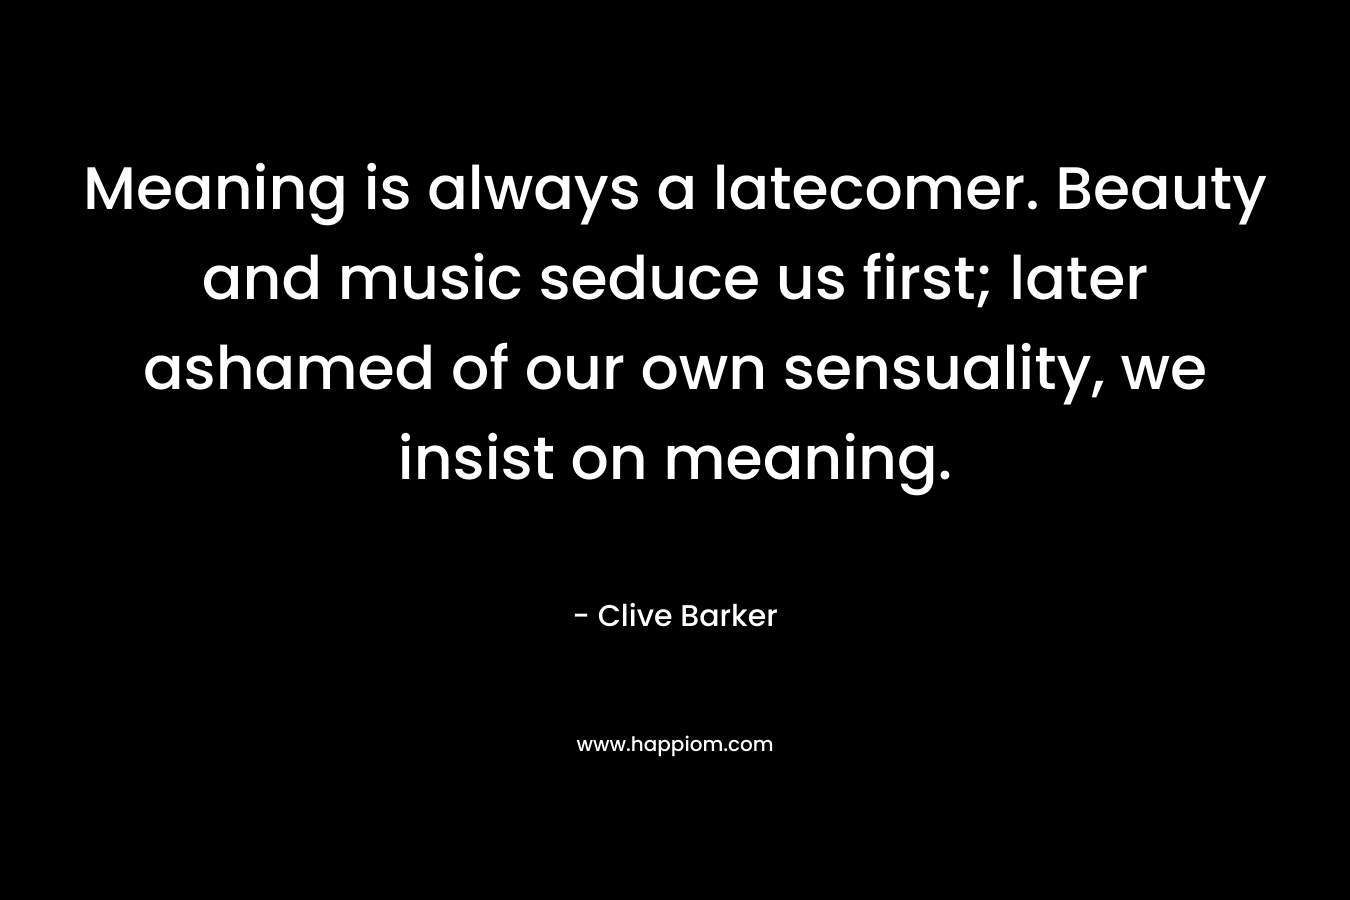 Meaning is always a latecomer. Beauty and music seduce us first; later ashamed of our own sensuality, we insist on meaning.